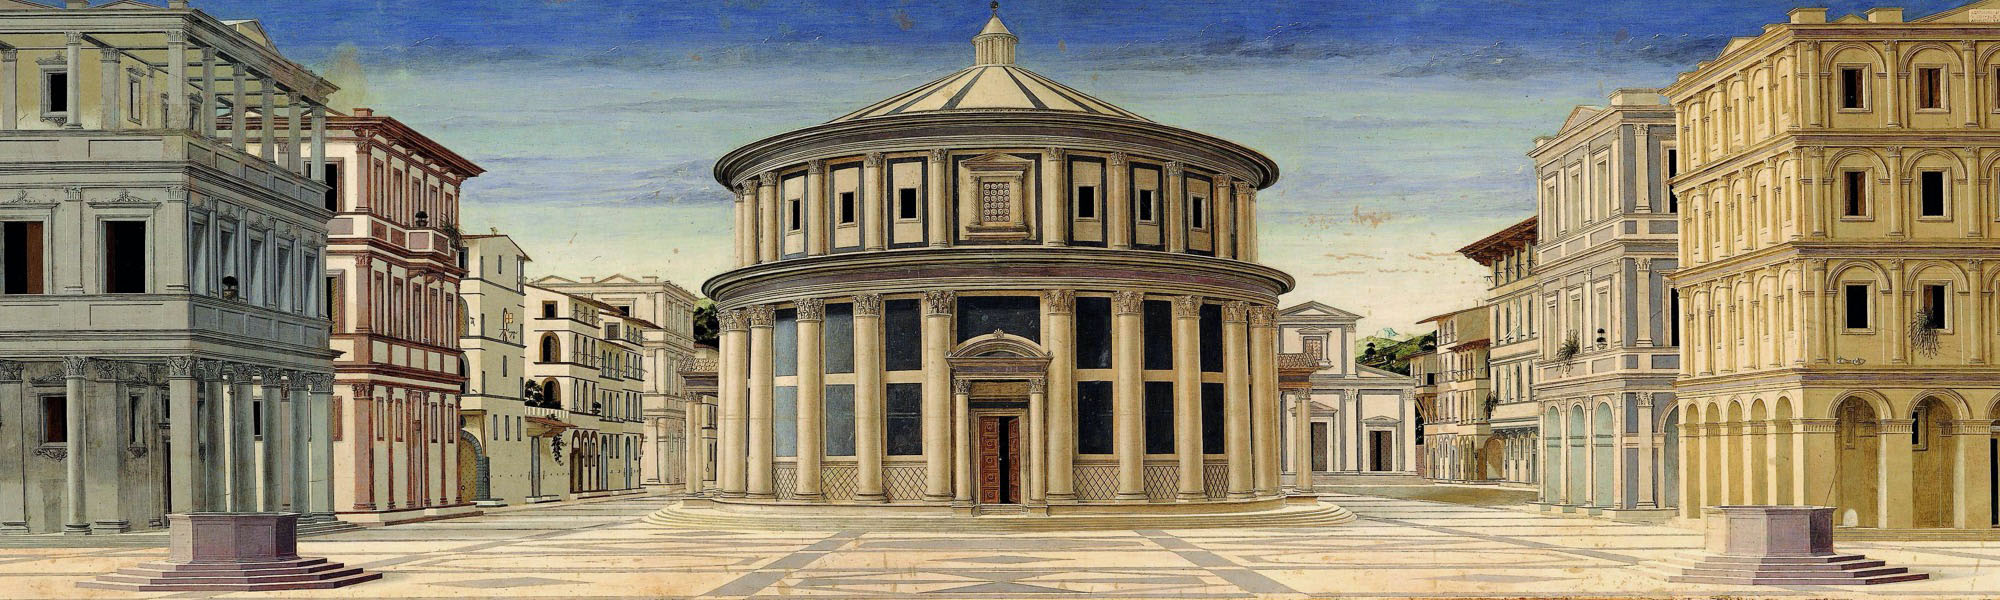 A painting of an antique building in Italy